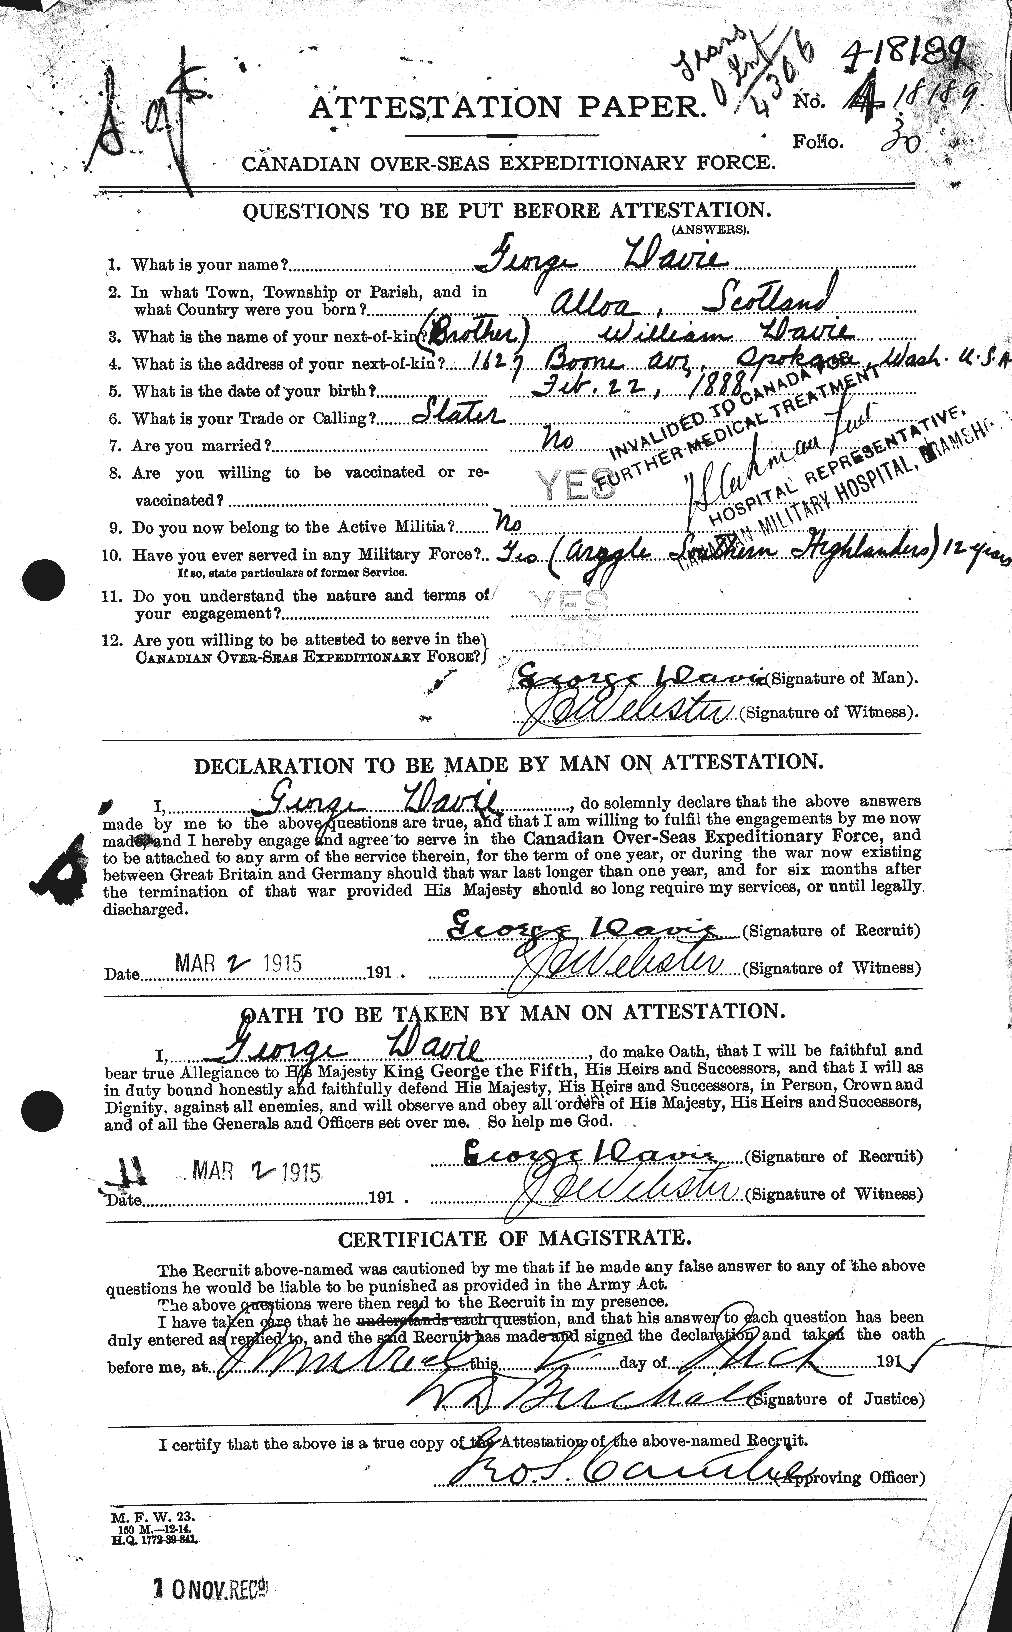 Personnel Records of the First World War - CEF 278823a